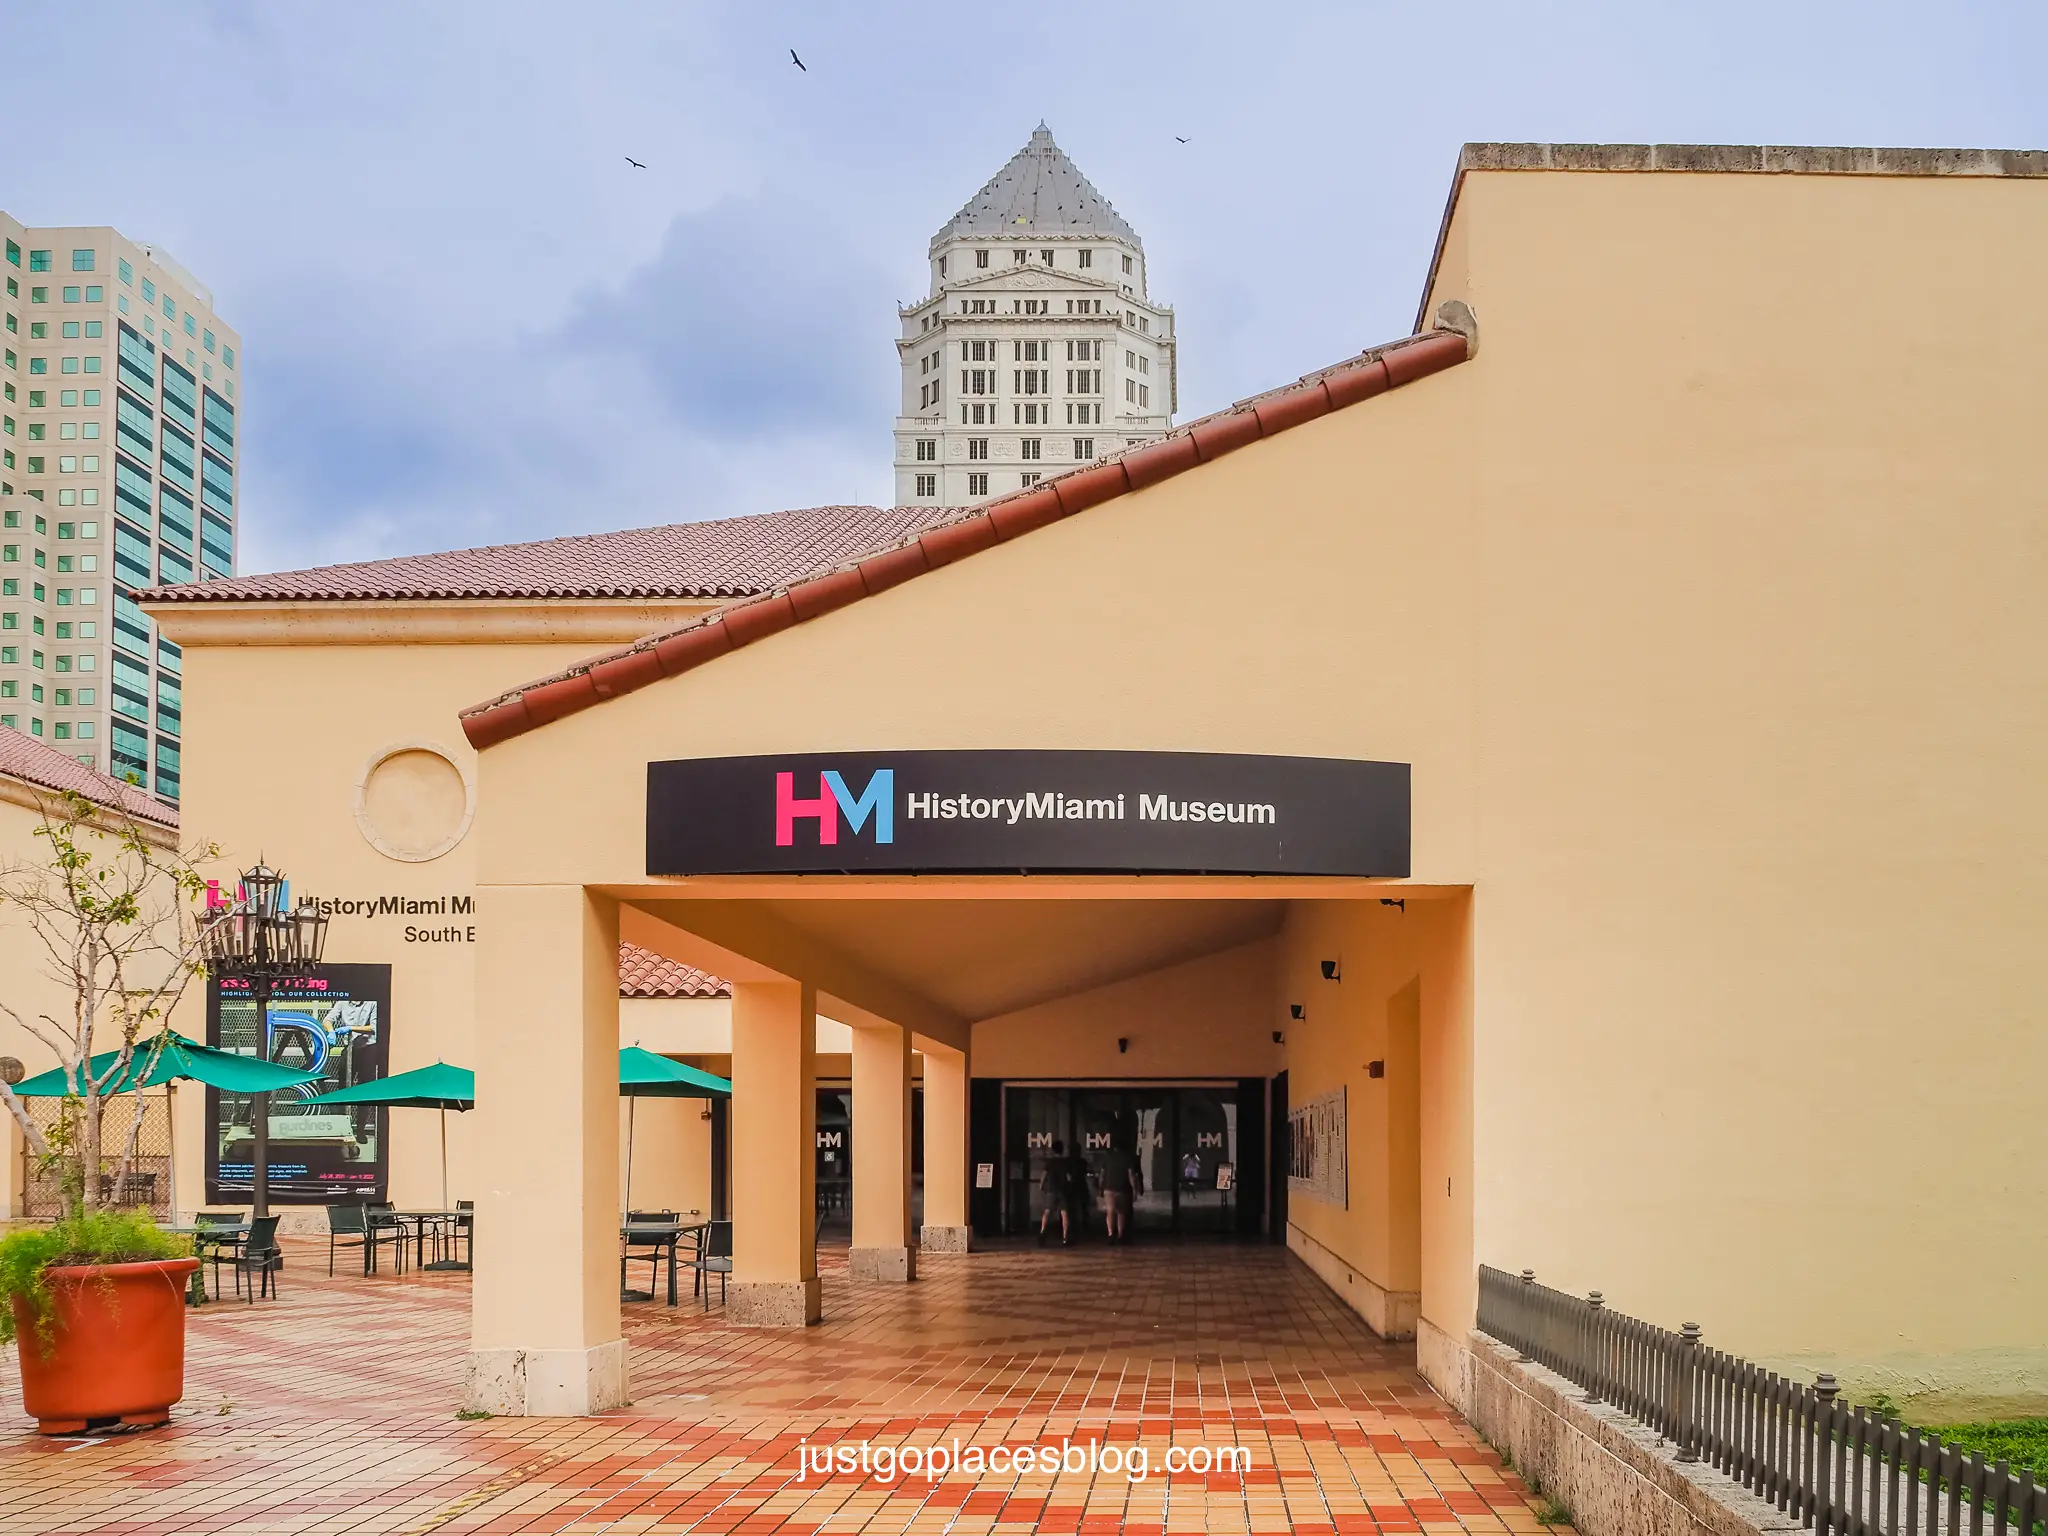 HistoryMiami is a museum of the history of South Florida